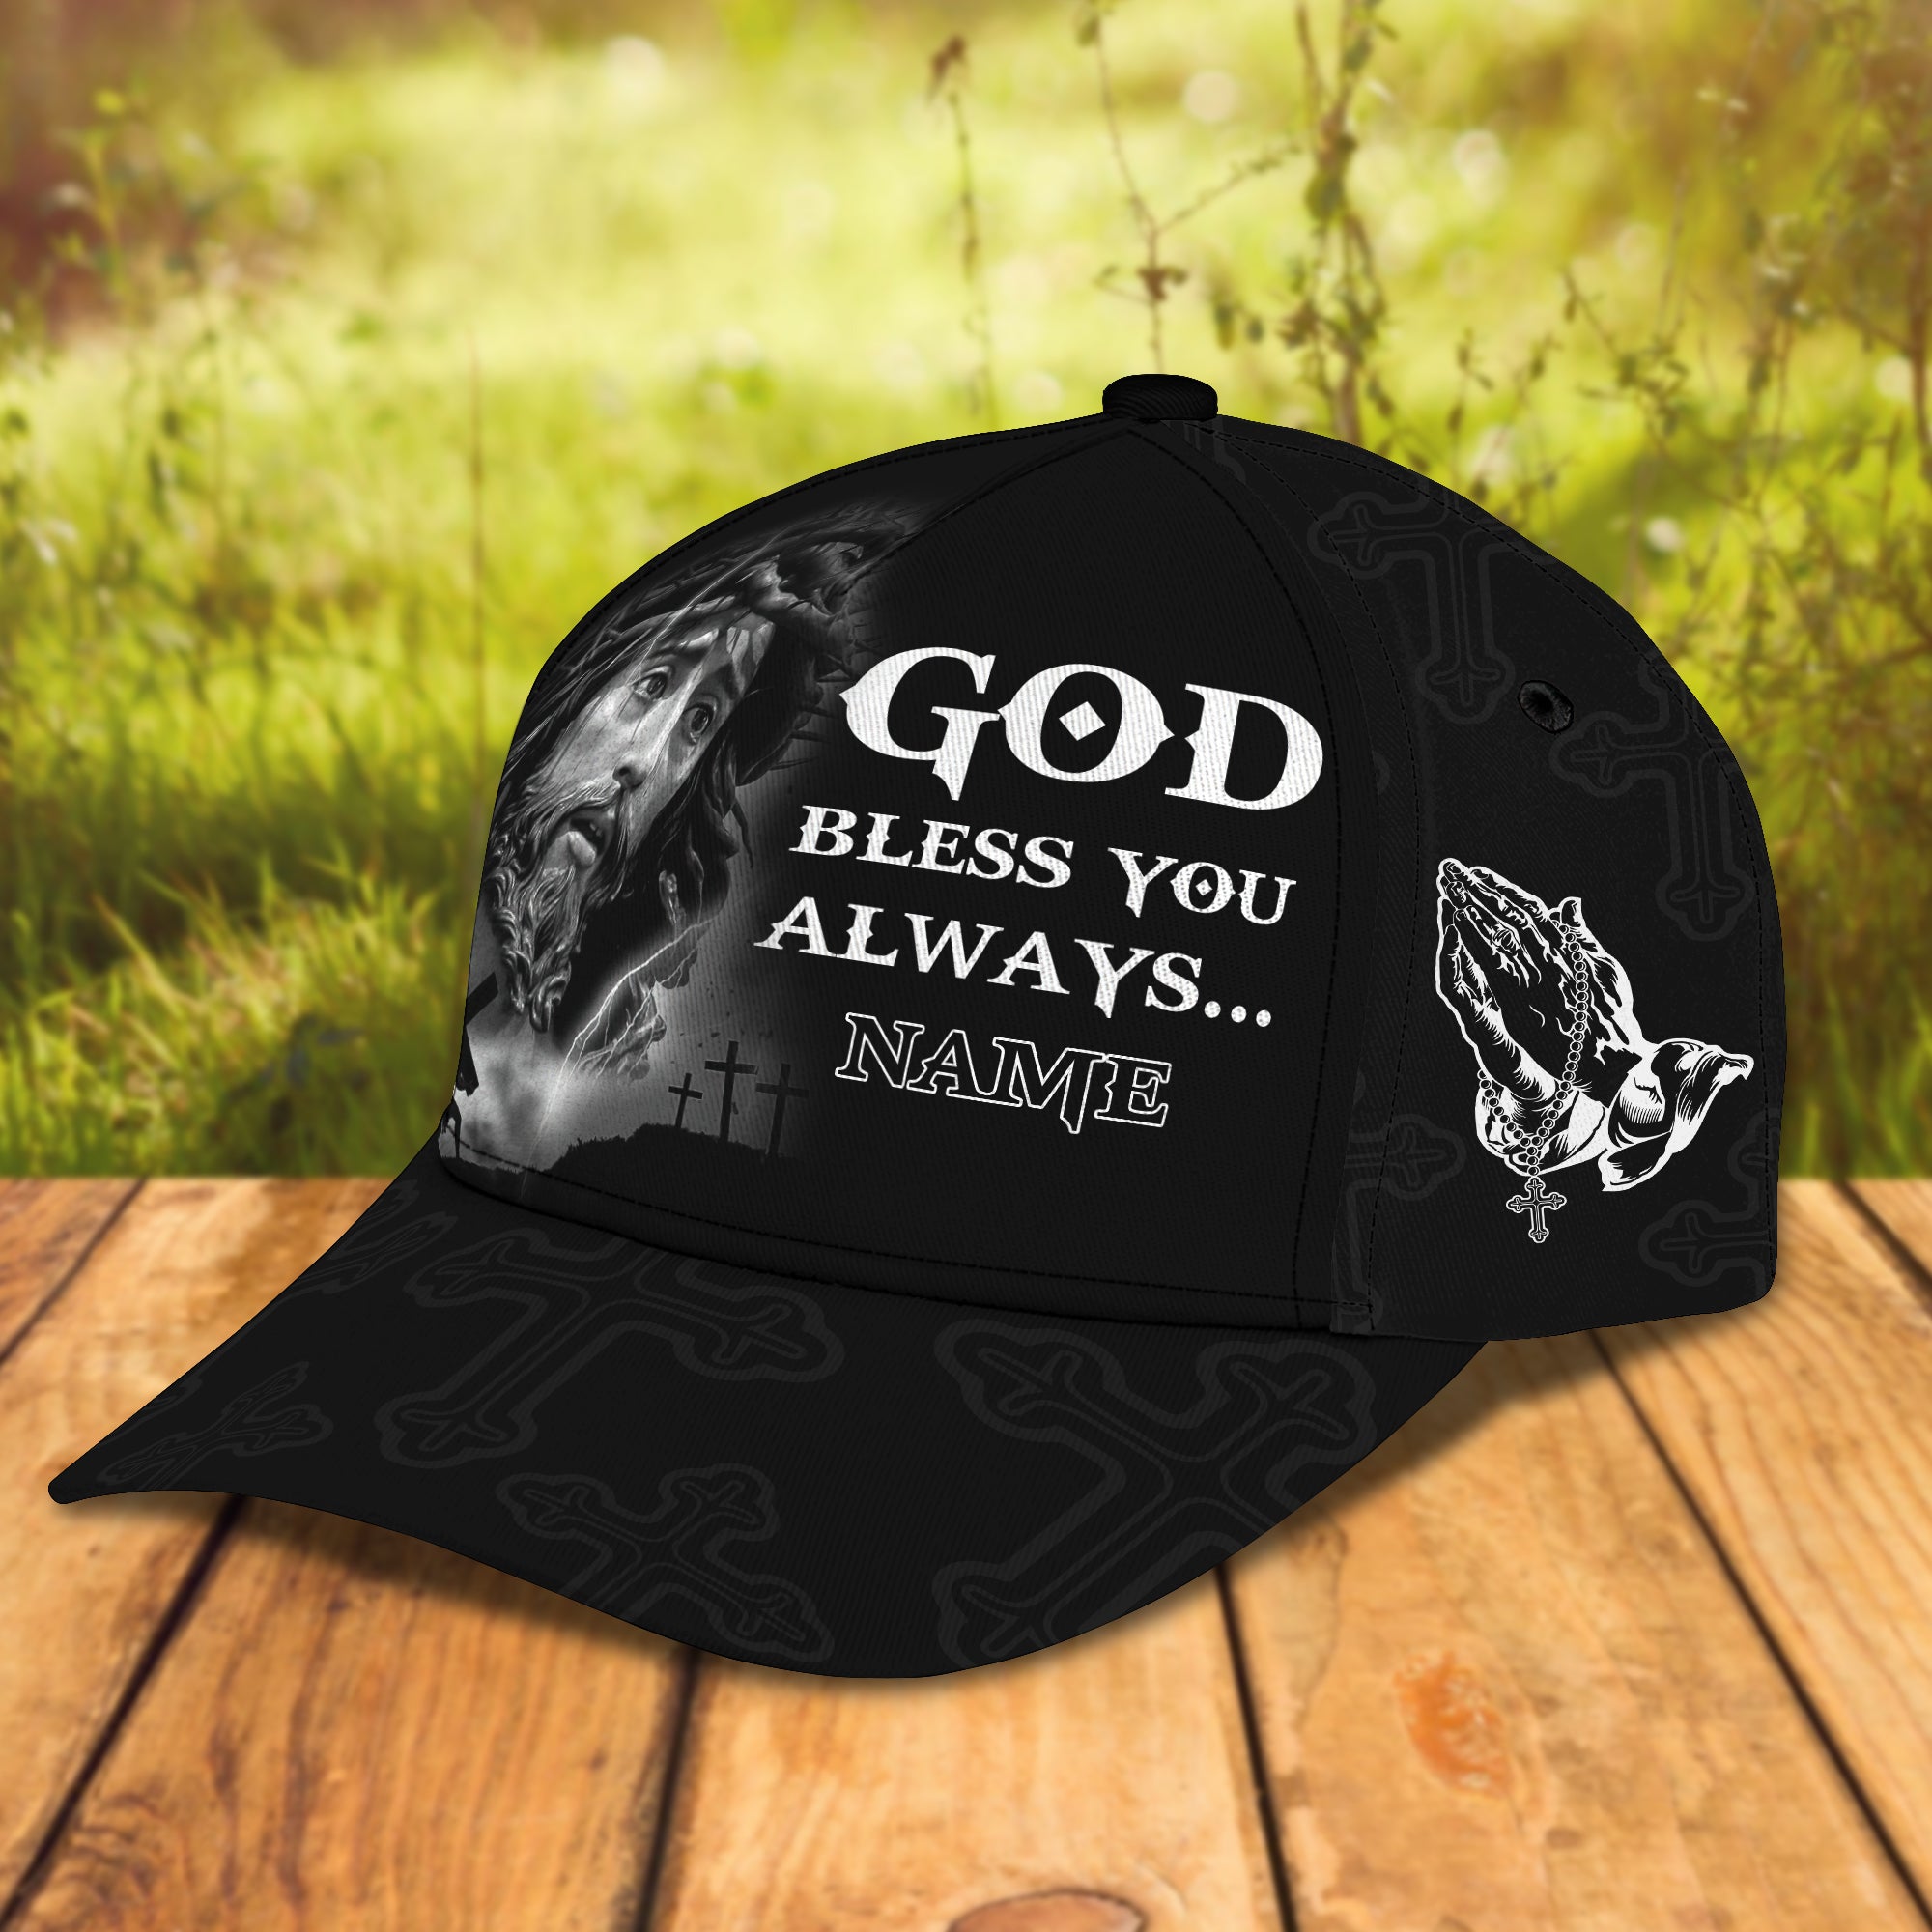 Jesus Vn96 - Personalized Cap 013